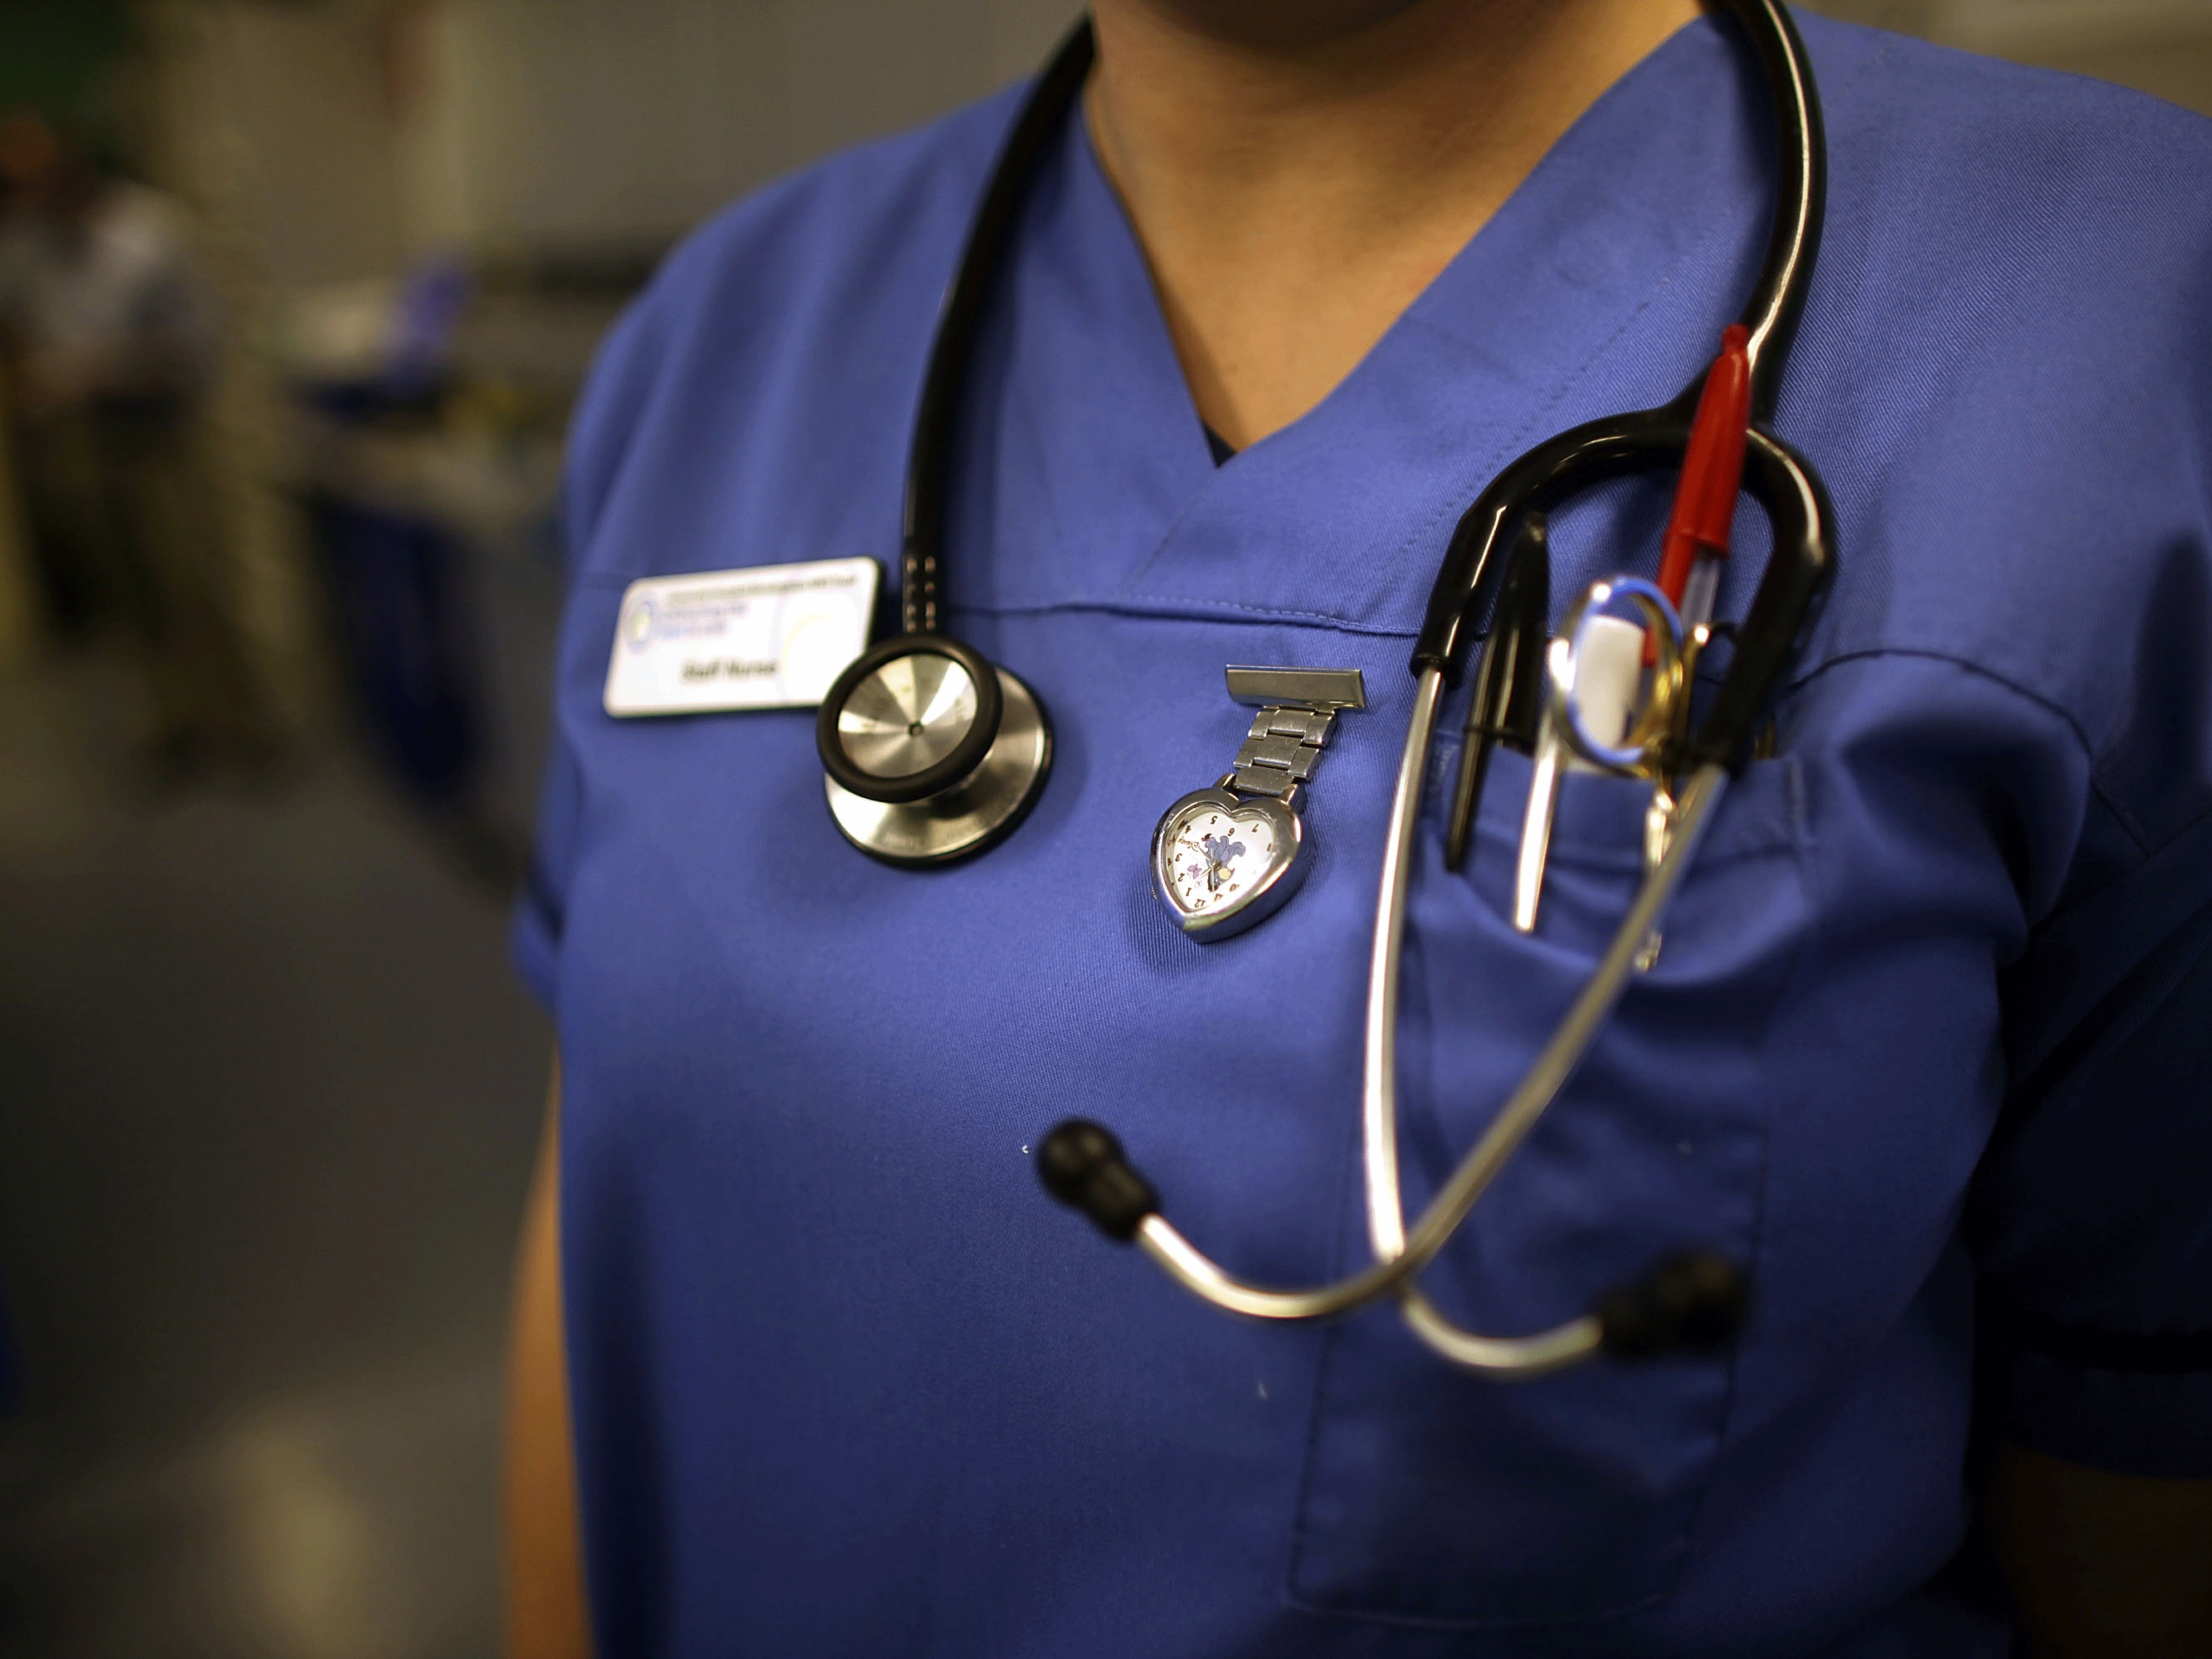 Immigration rules mean not enough nurses are being recruited from outside the EU, NHS professionals have warned